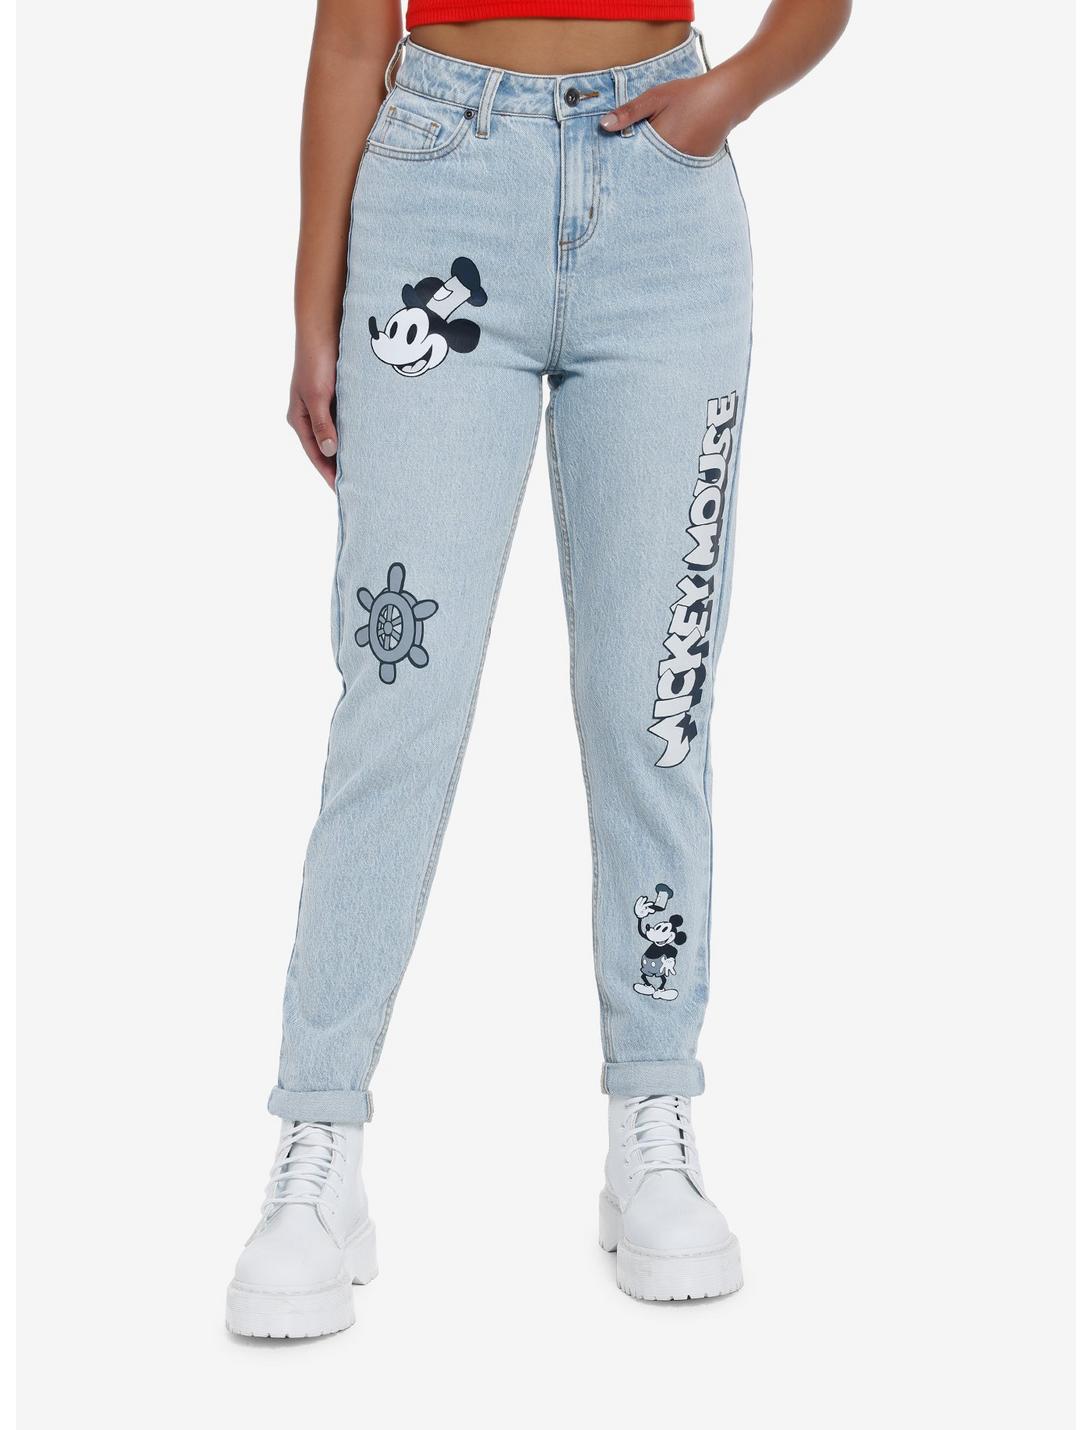 Disney Mickey Mouse Steamboat Willie Mom Jeans, LIGHT WASH, hi-res